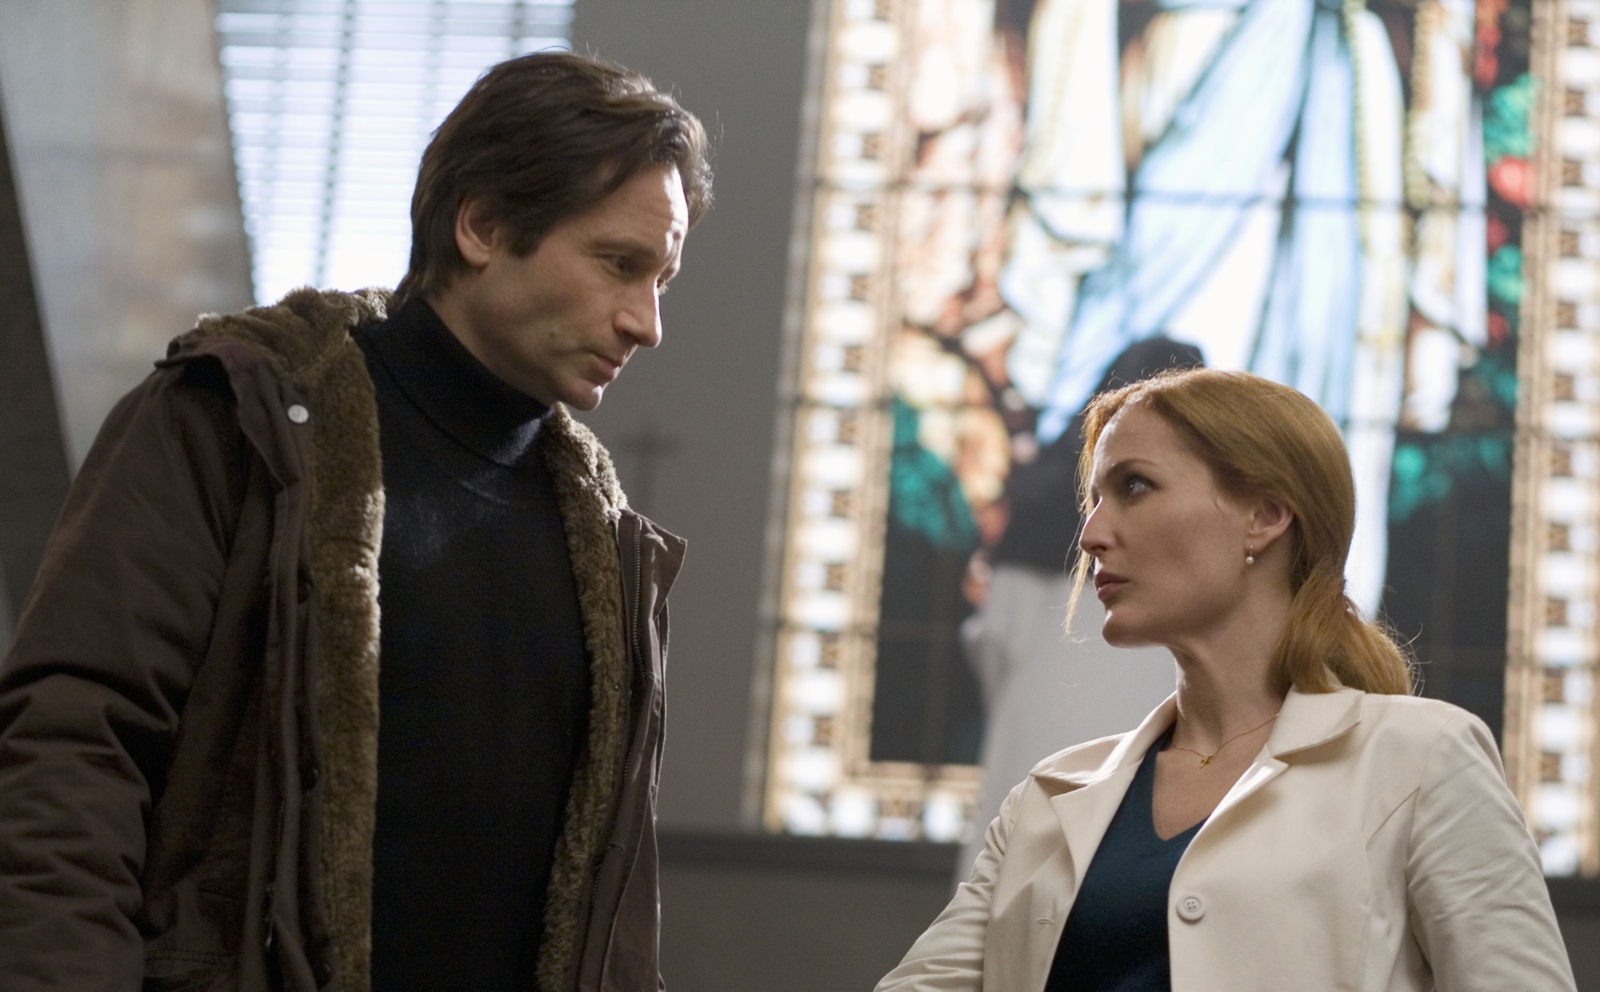 Geek insider, geekinsider, geekinsider. Com,, the truth is here: chris carter, david duchovny, and gillian anderson all want "x-files 3", entertainment